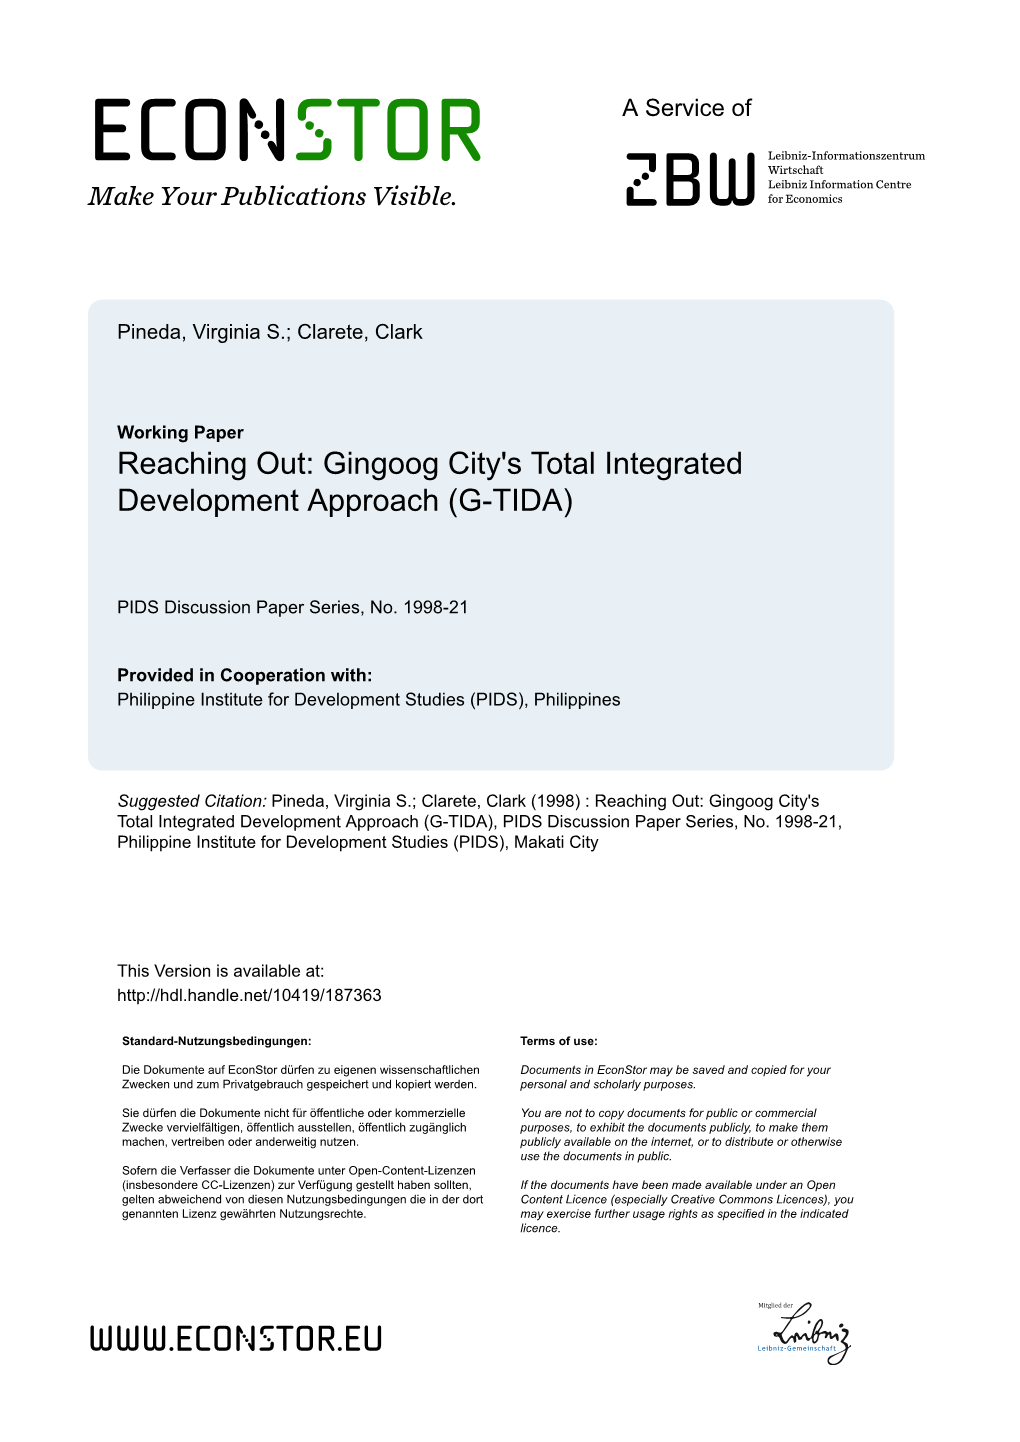 Gingoog City's Total Integrated Development Approach (G-TIDA)